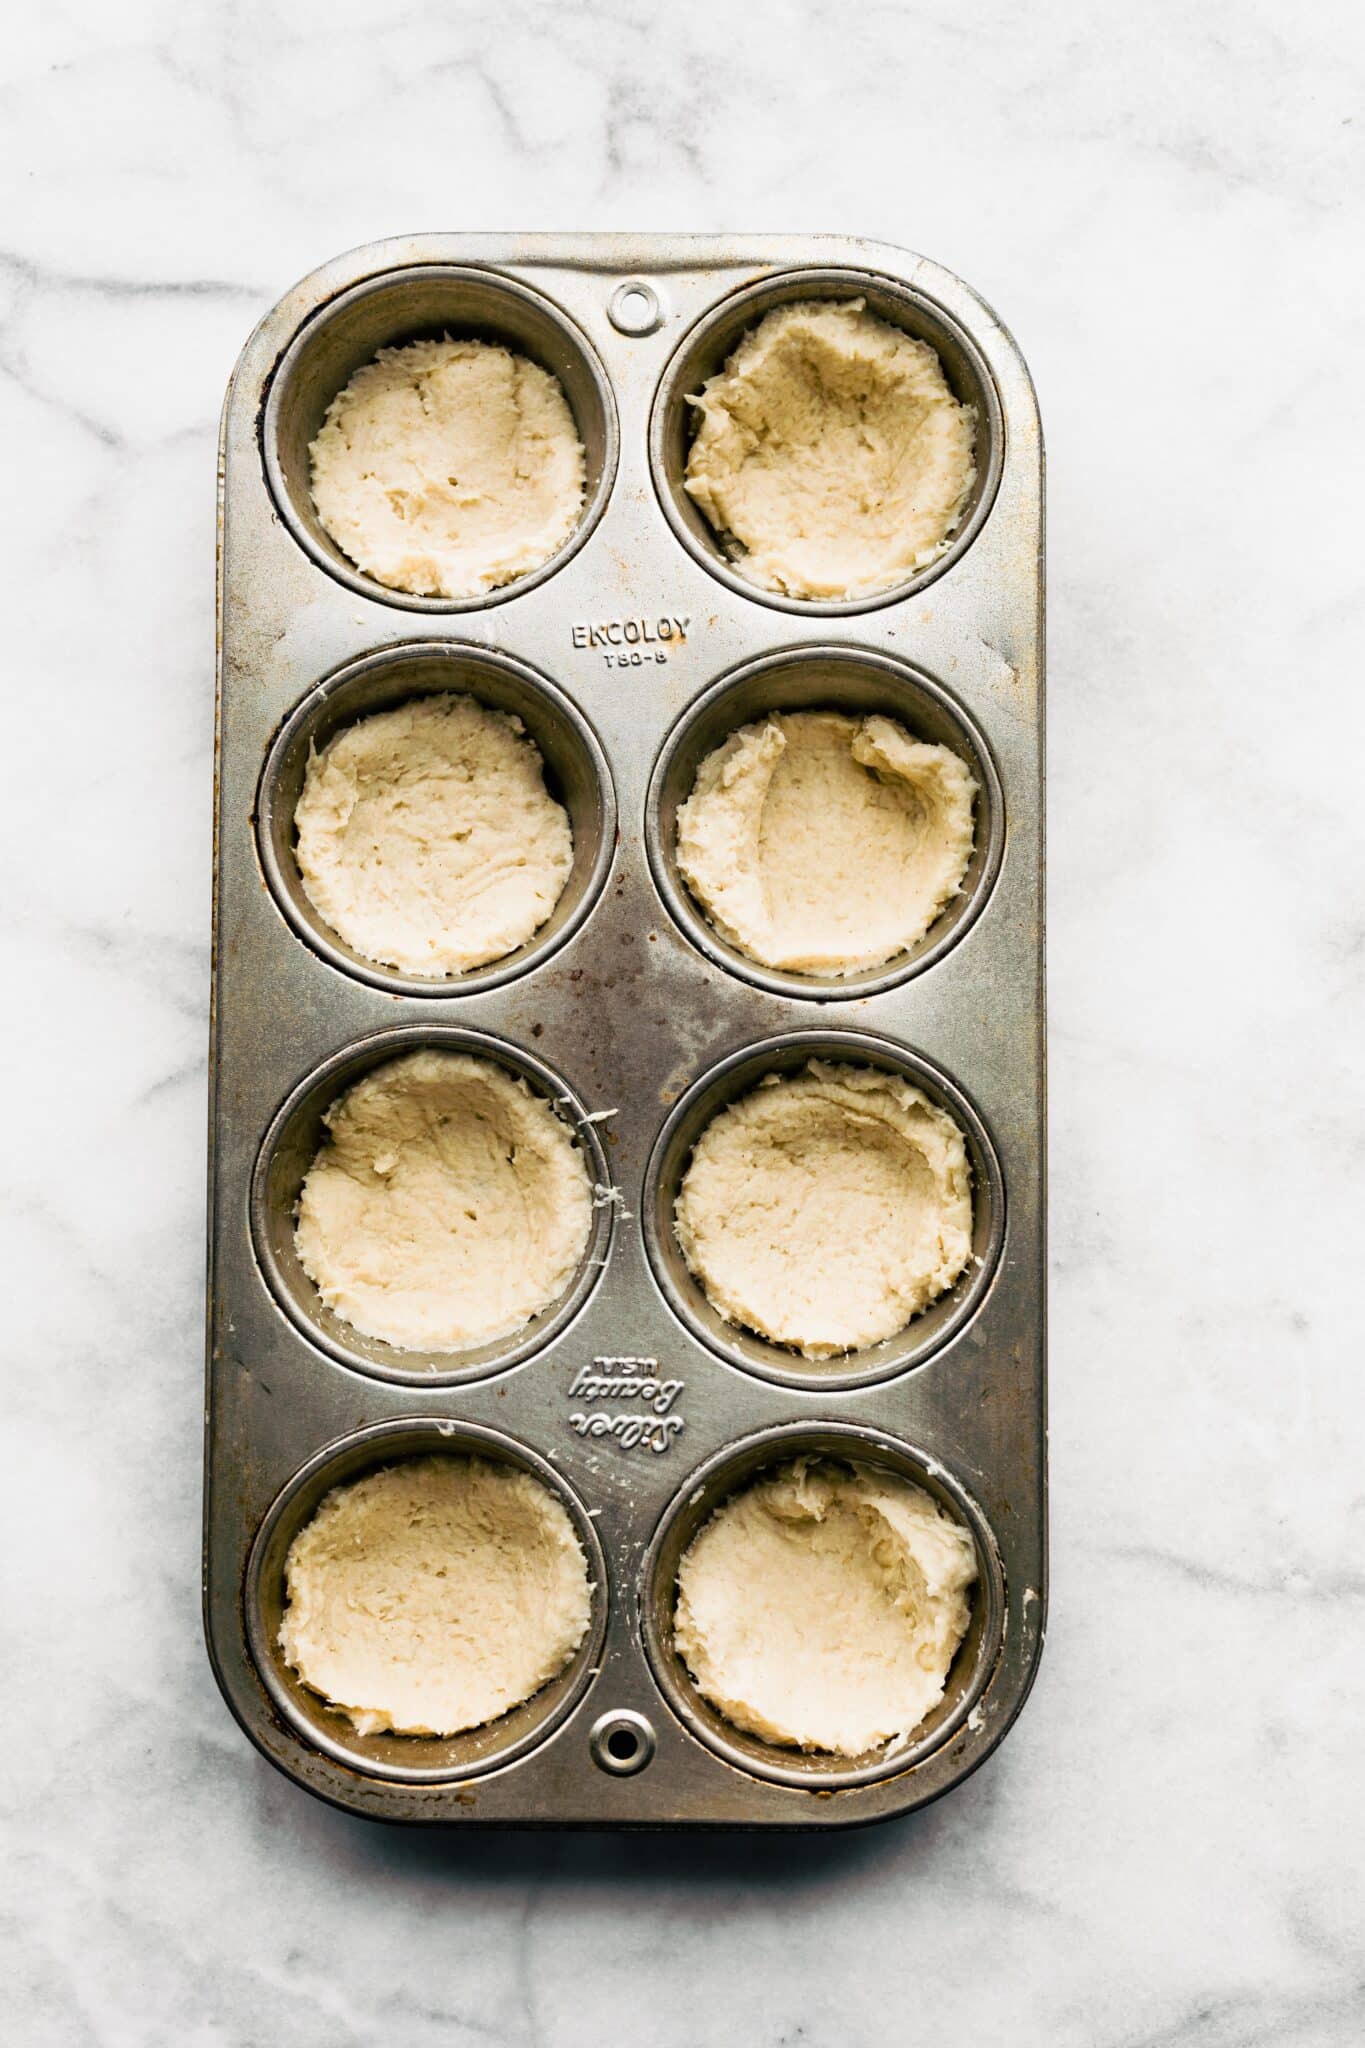 Gluten free pizza dough cut into small rounds placed in 8 muffin tin wells.